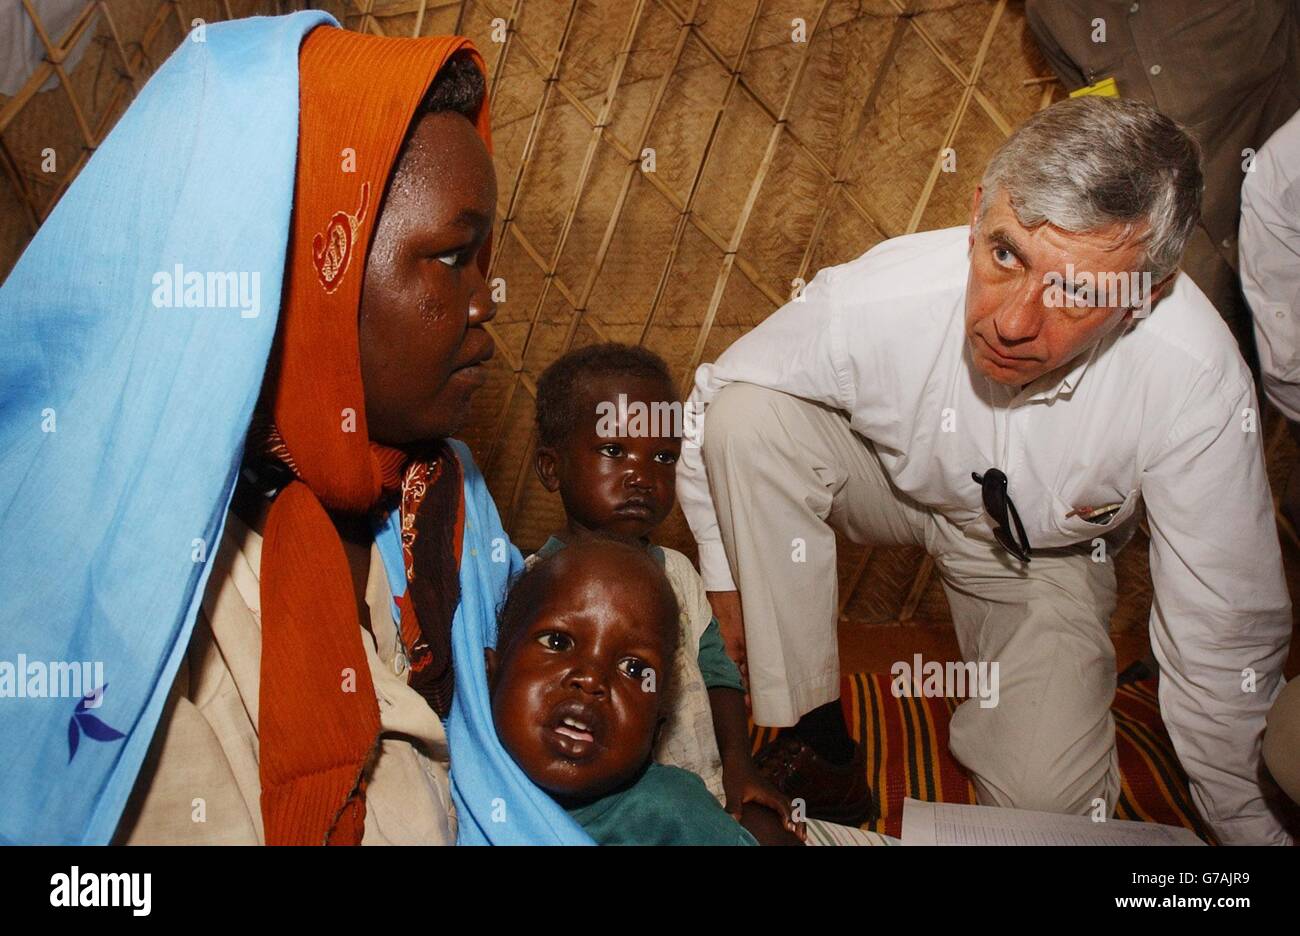 Foreign Secretary Jack Straw meets refugees at the Abu Shouk refugee camp near El Fasher in the Darfur region of northern Sudan. The camp - described by one British official as the 'Hilton' of the Darfur camps - is home to around 57,000 people forced to flee their villages following a campaign of violence by the Arab militias known as the Janjaweed. Mr Straw warned the Sudanese government that it must do more to protect refugees fleeing the violence in Darfur after seeing for himself the conditions in which they are living. Stock Photo